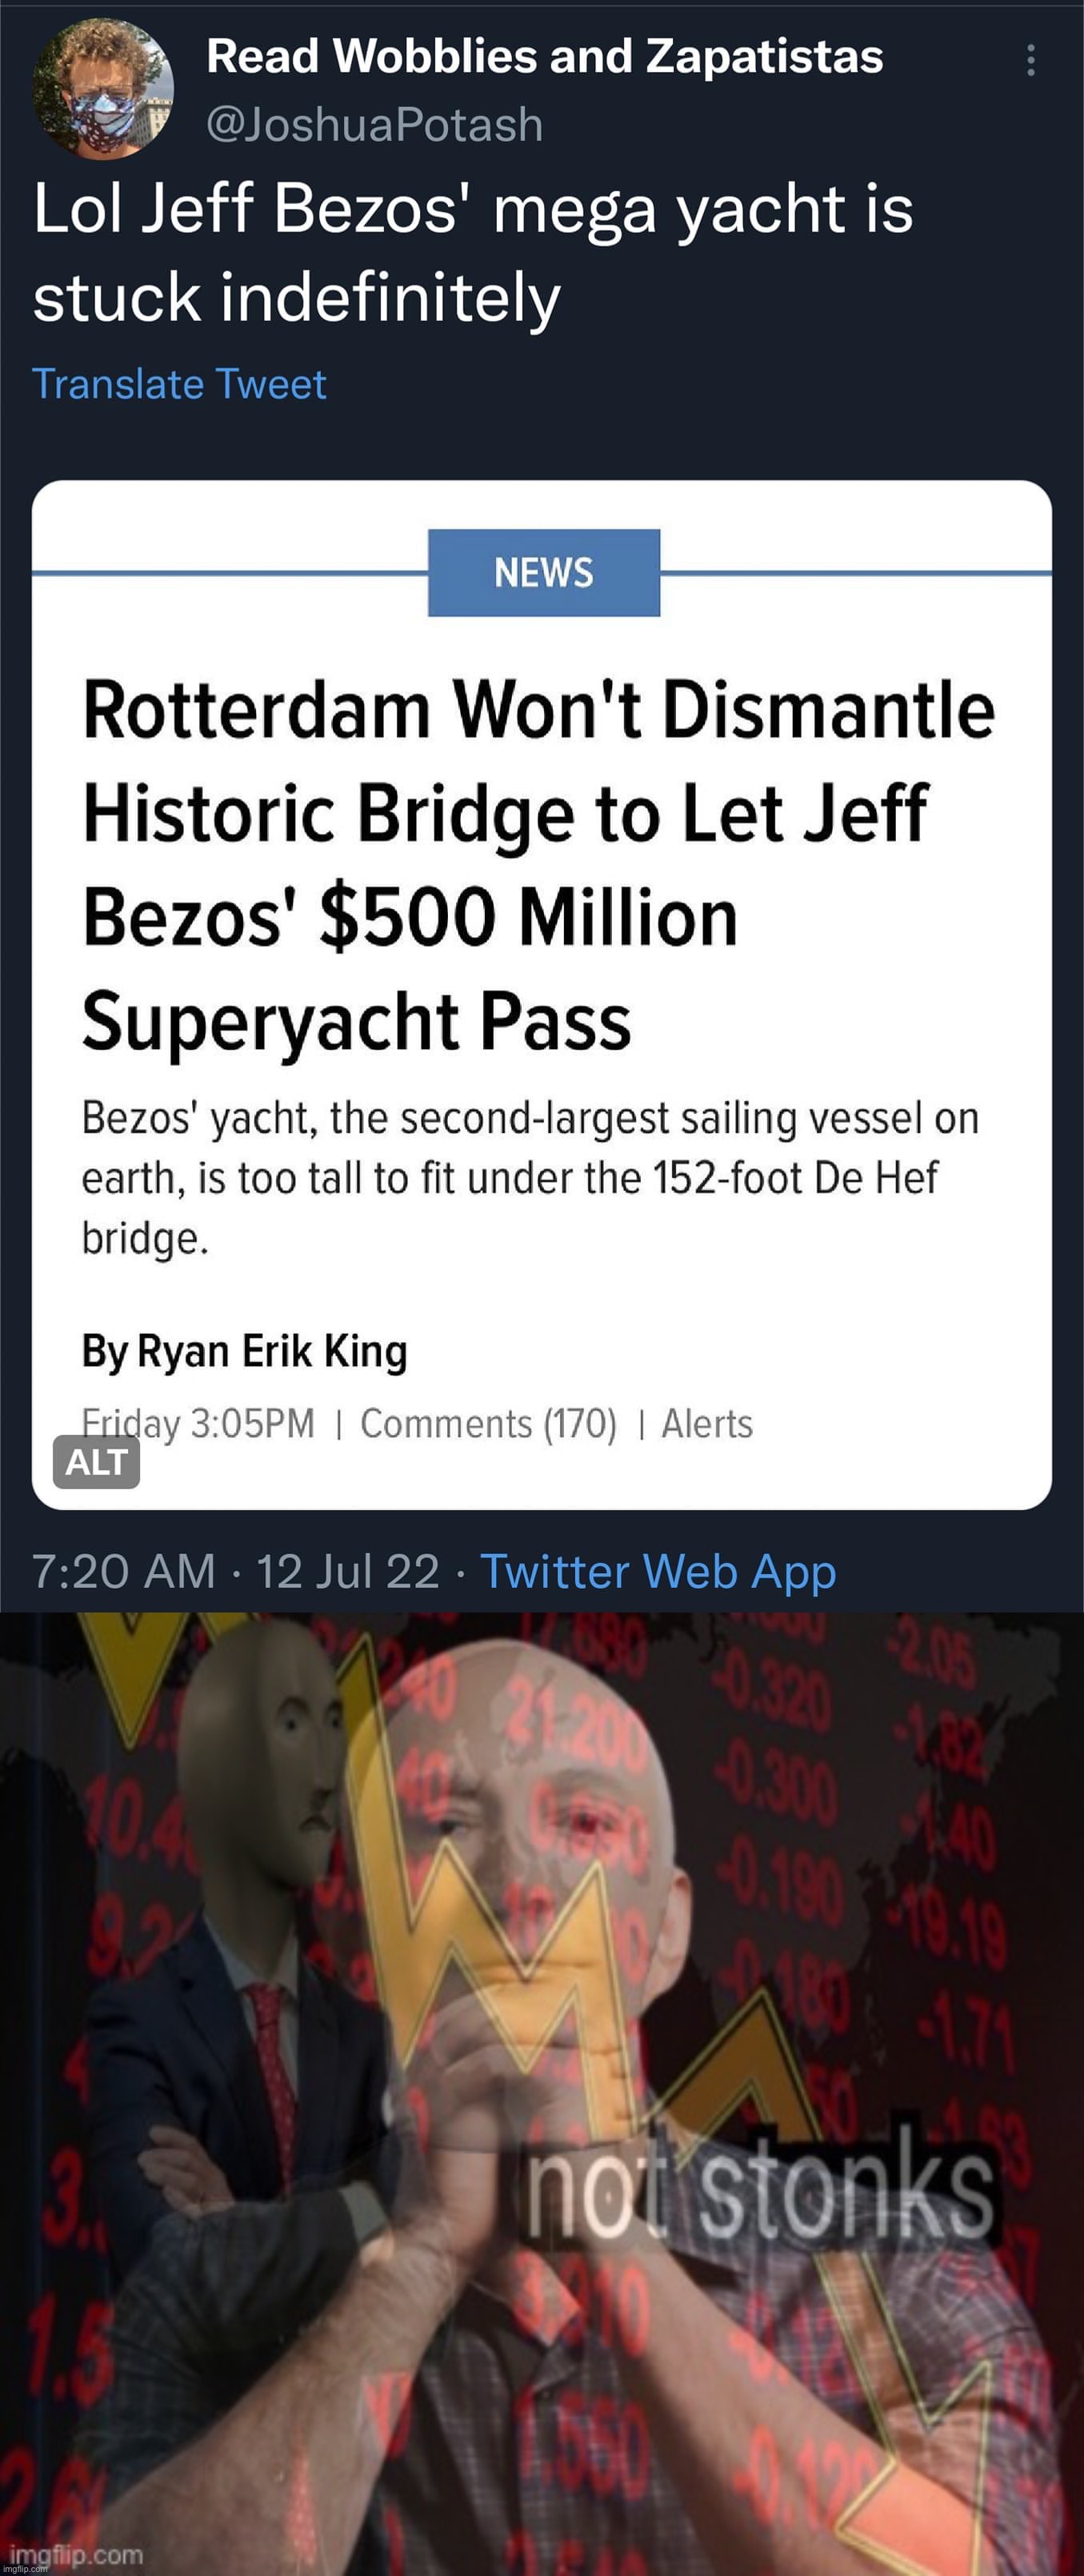 Not stonks | image tagged in jeff bezos yacht stuck,jeff bezos not stonks,not stonks,jeff bezos,bezos,oof | made w/ Imgflip meme maker